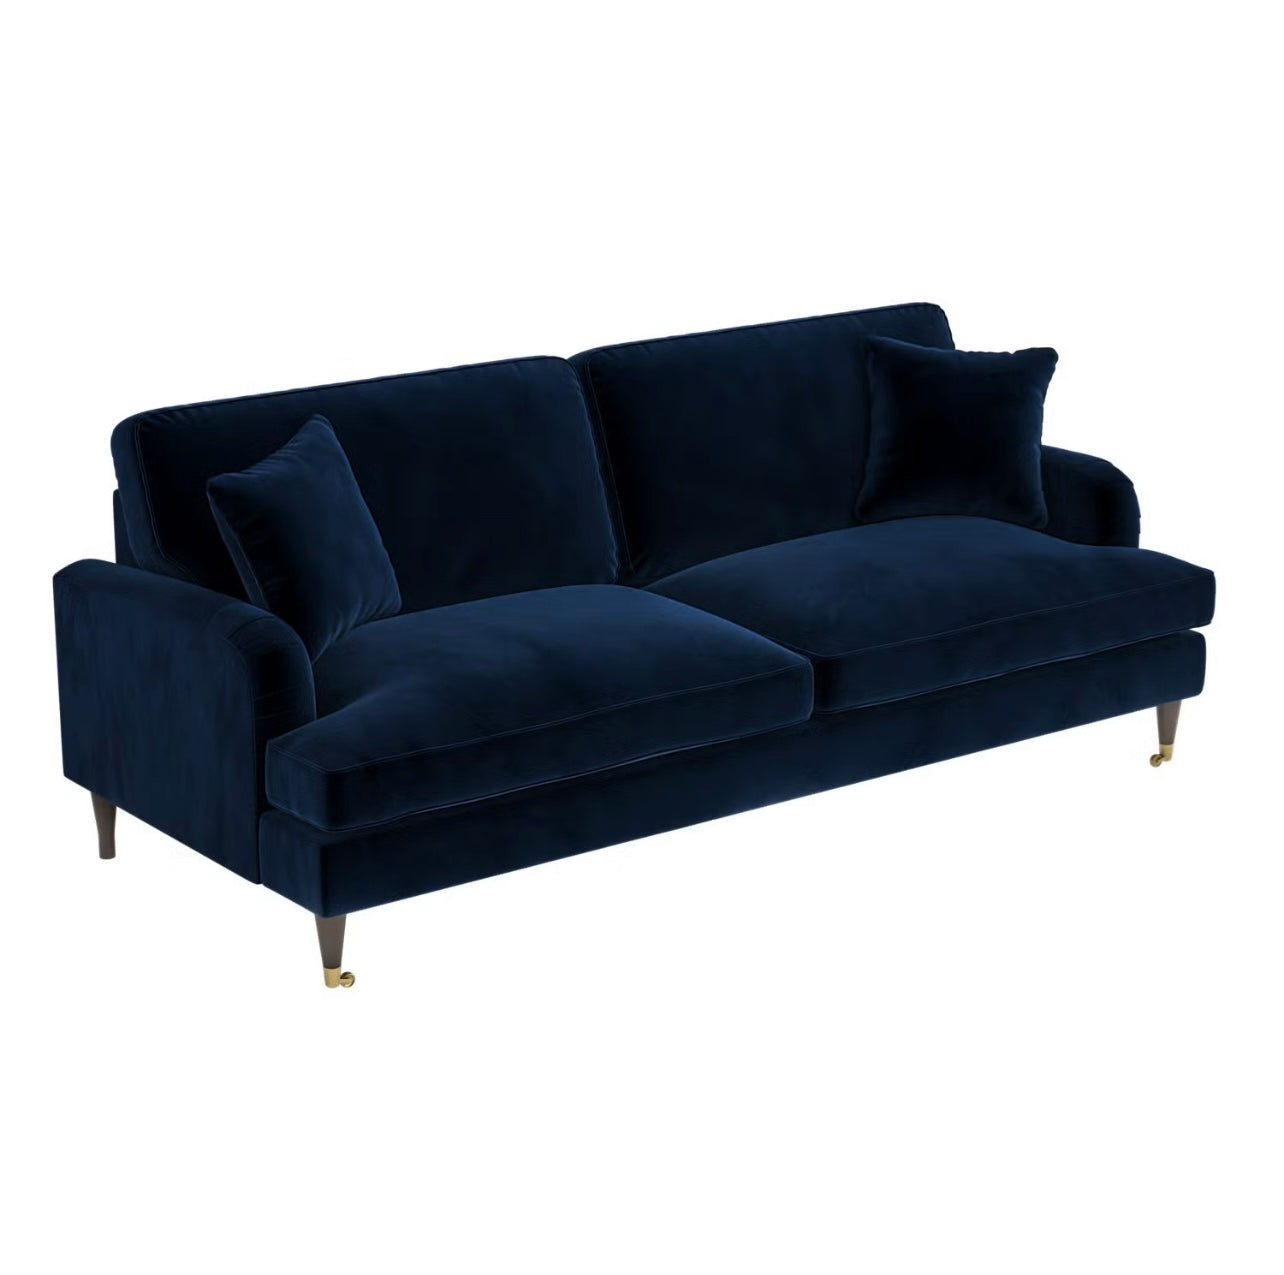 4 Seater Velvet Sofa with Cushions